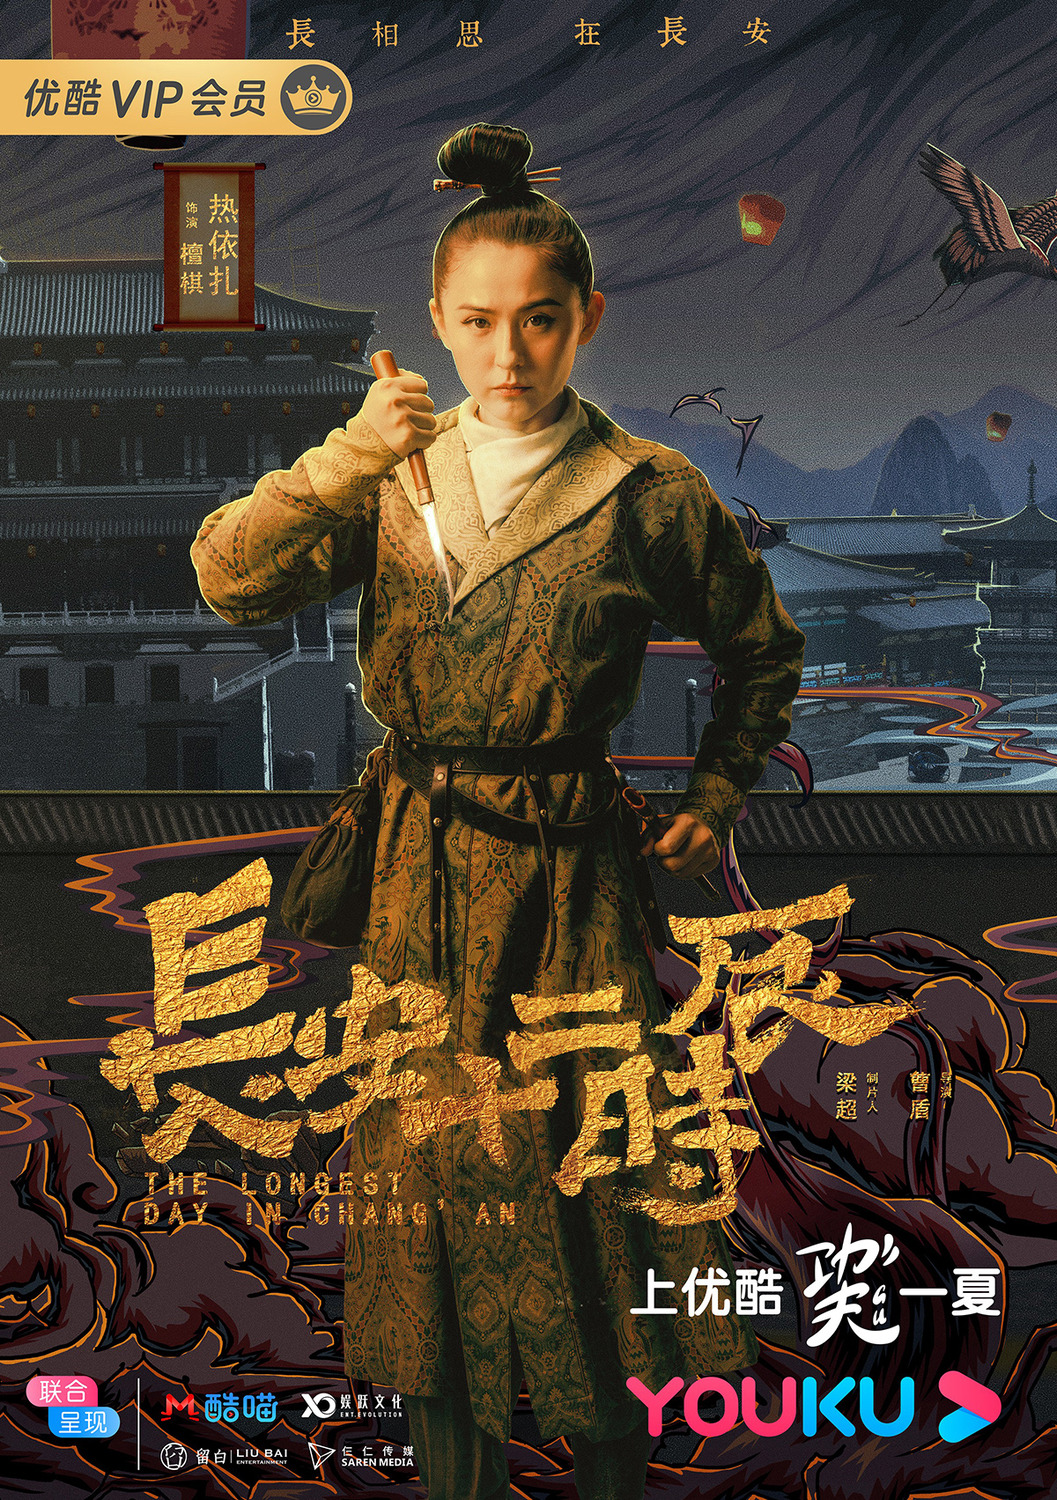 Extra Large TV Poster Image for Chang'an shi er shi chen (#11 of 18)